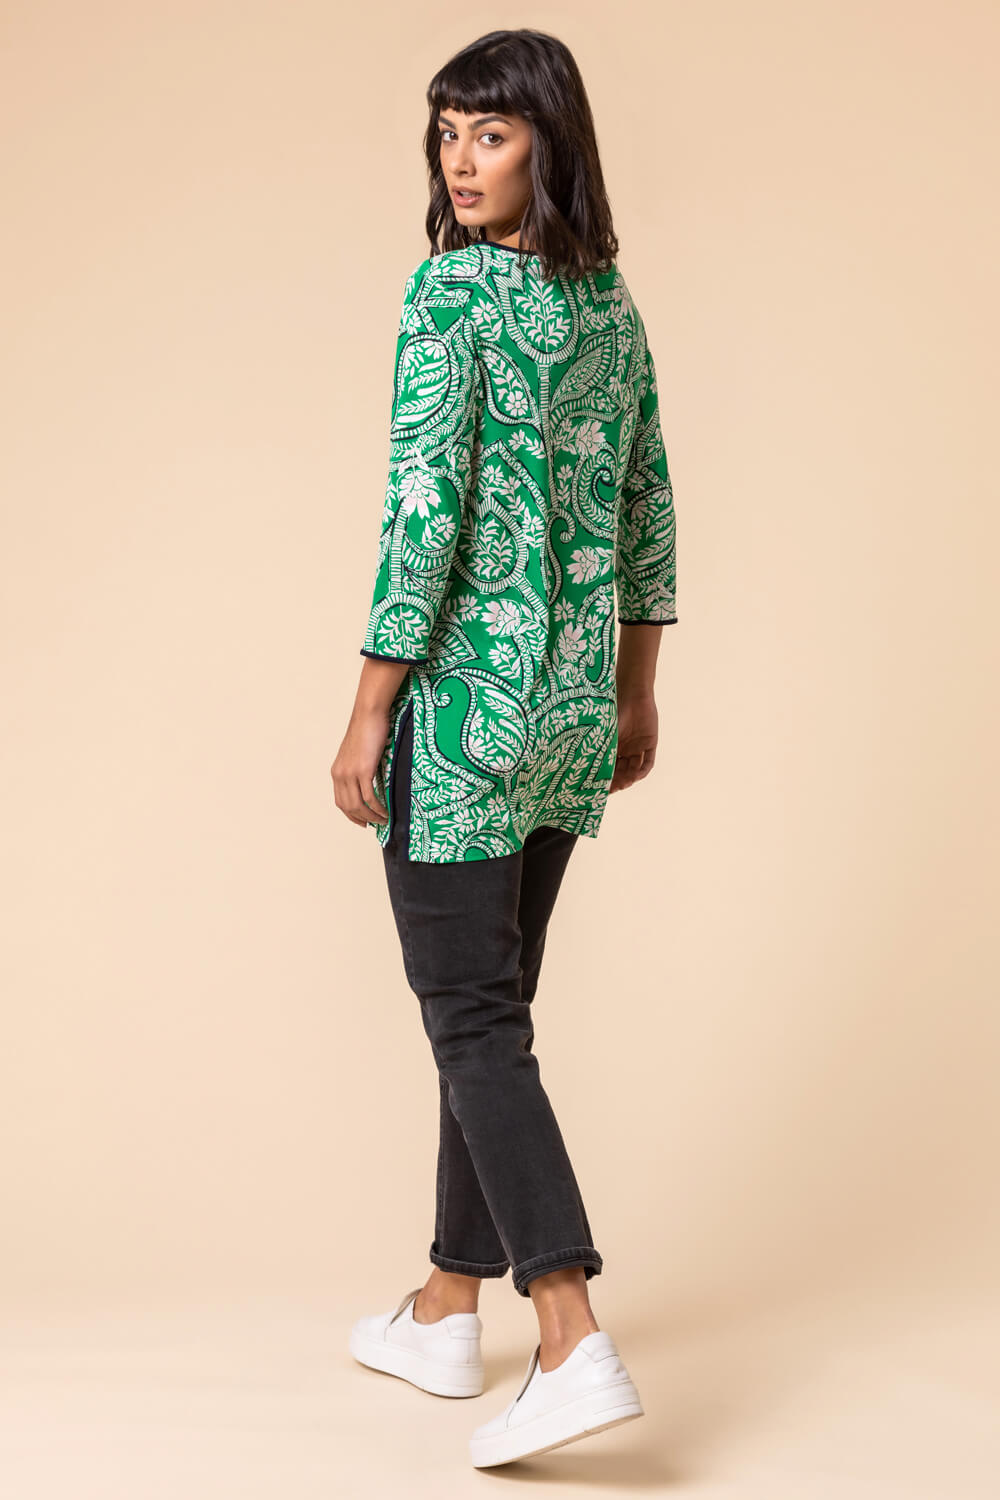 Green Paisley Print Contrast Trim Tunic Top, Image 2 of 4